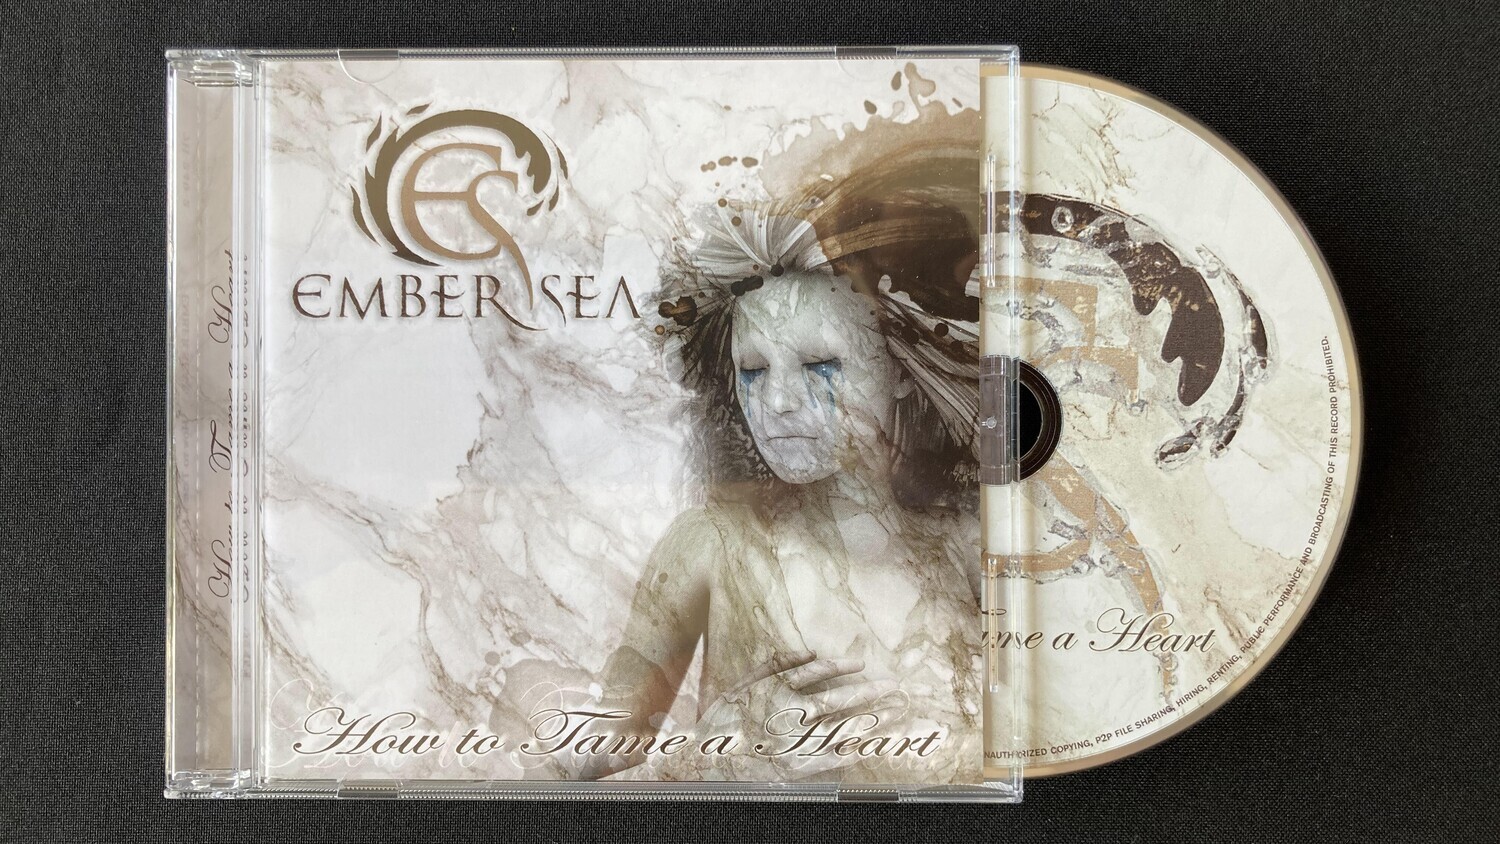 CD 'How to Tame a Heart' incl. MP3/WAV & videos by Ember Sea